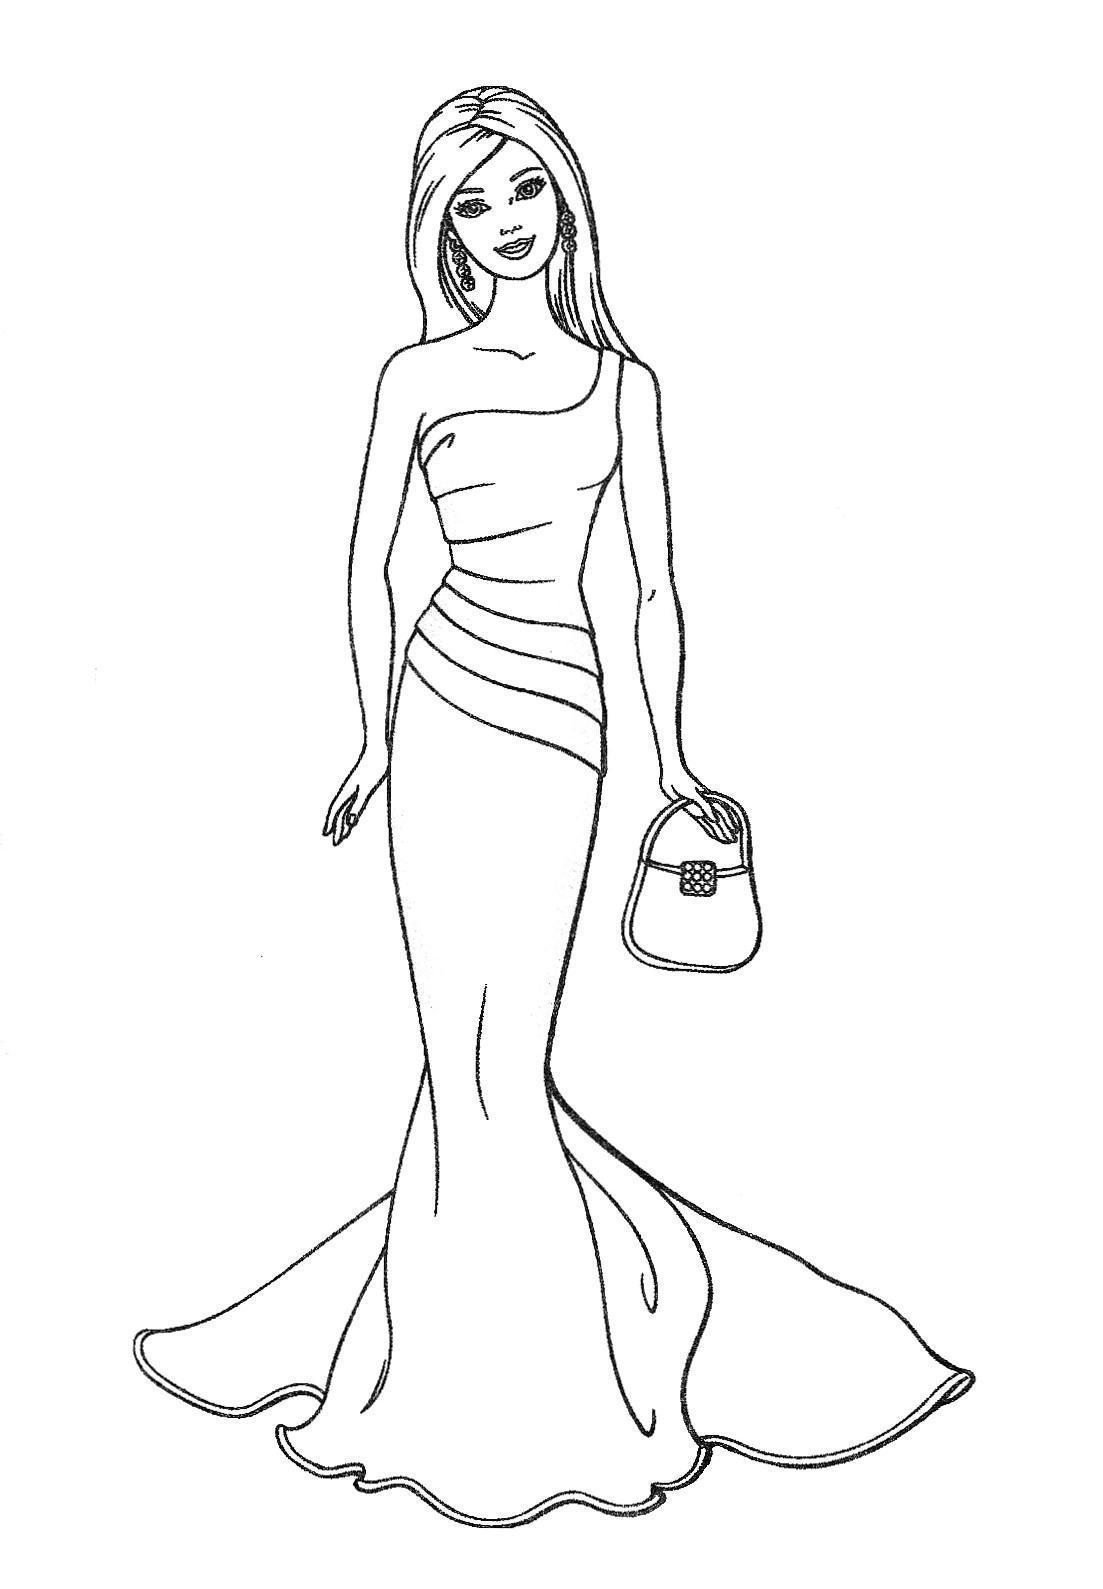 Barbie to color for children - Barbie Kids Coloring Pages